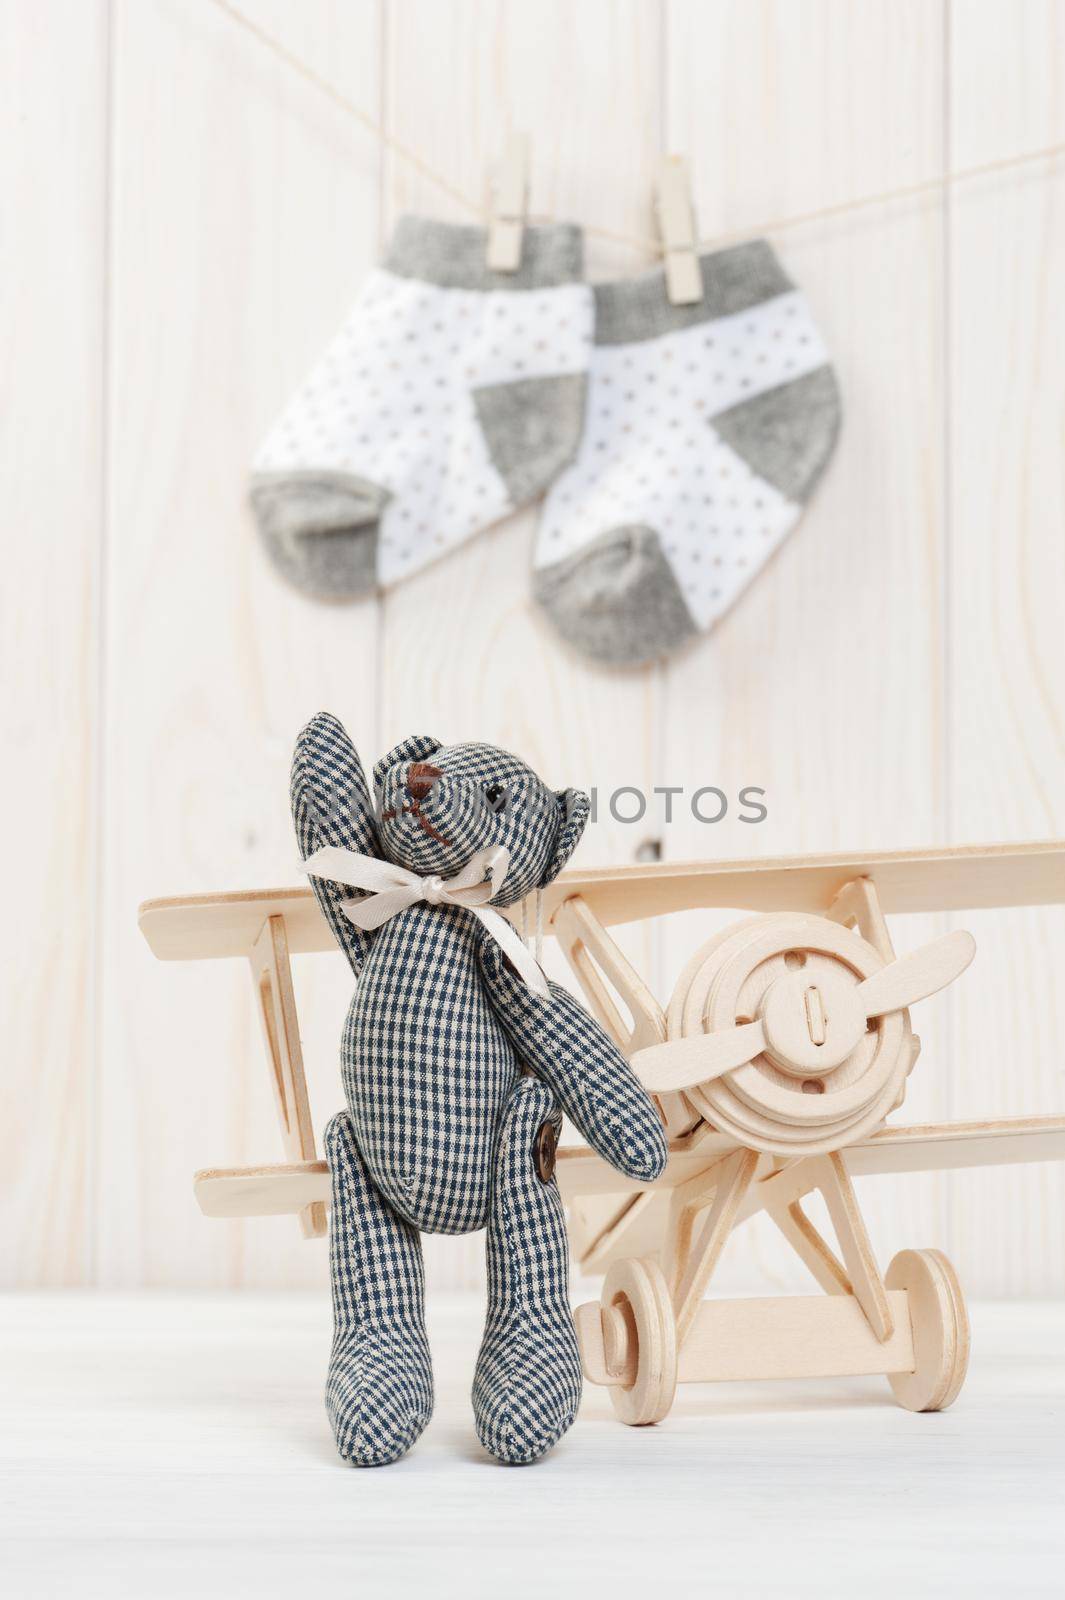 Cute teddy bear on wooden background with wooden baby toys